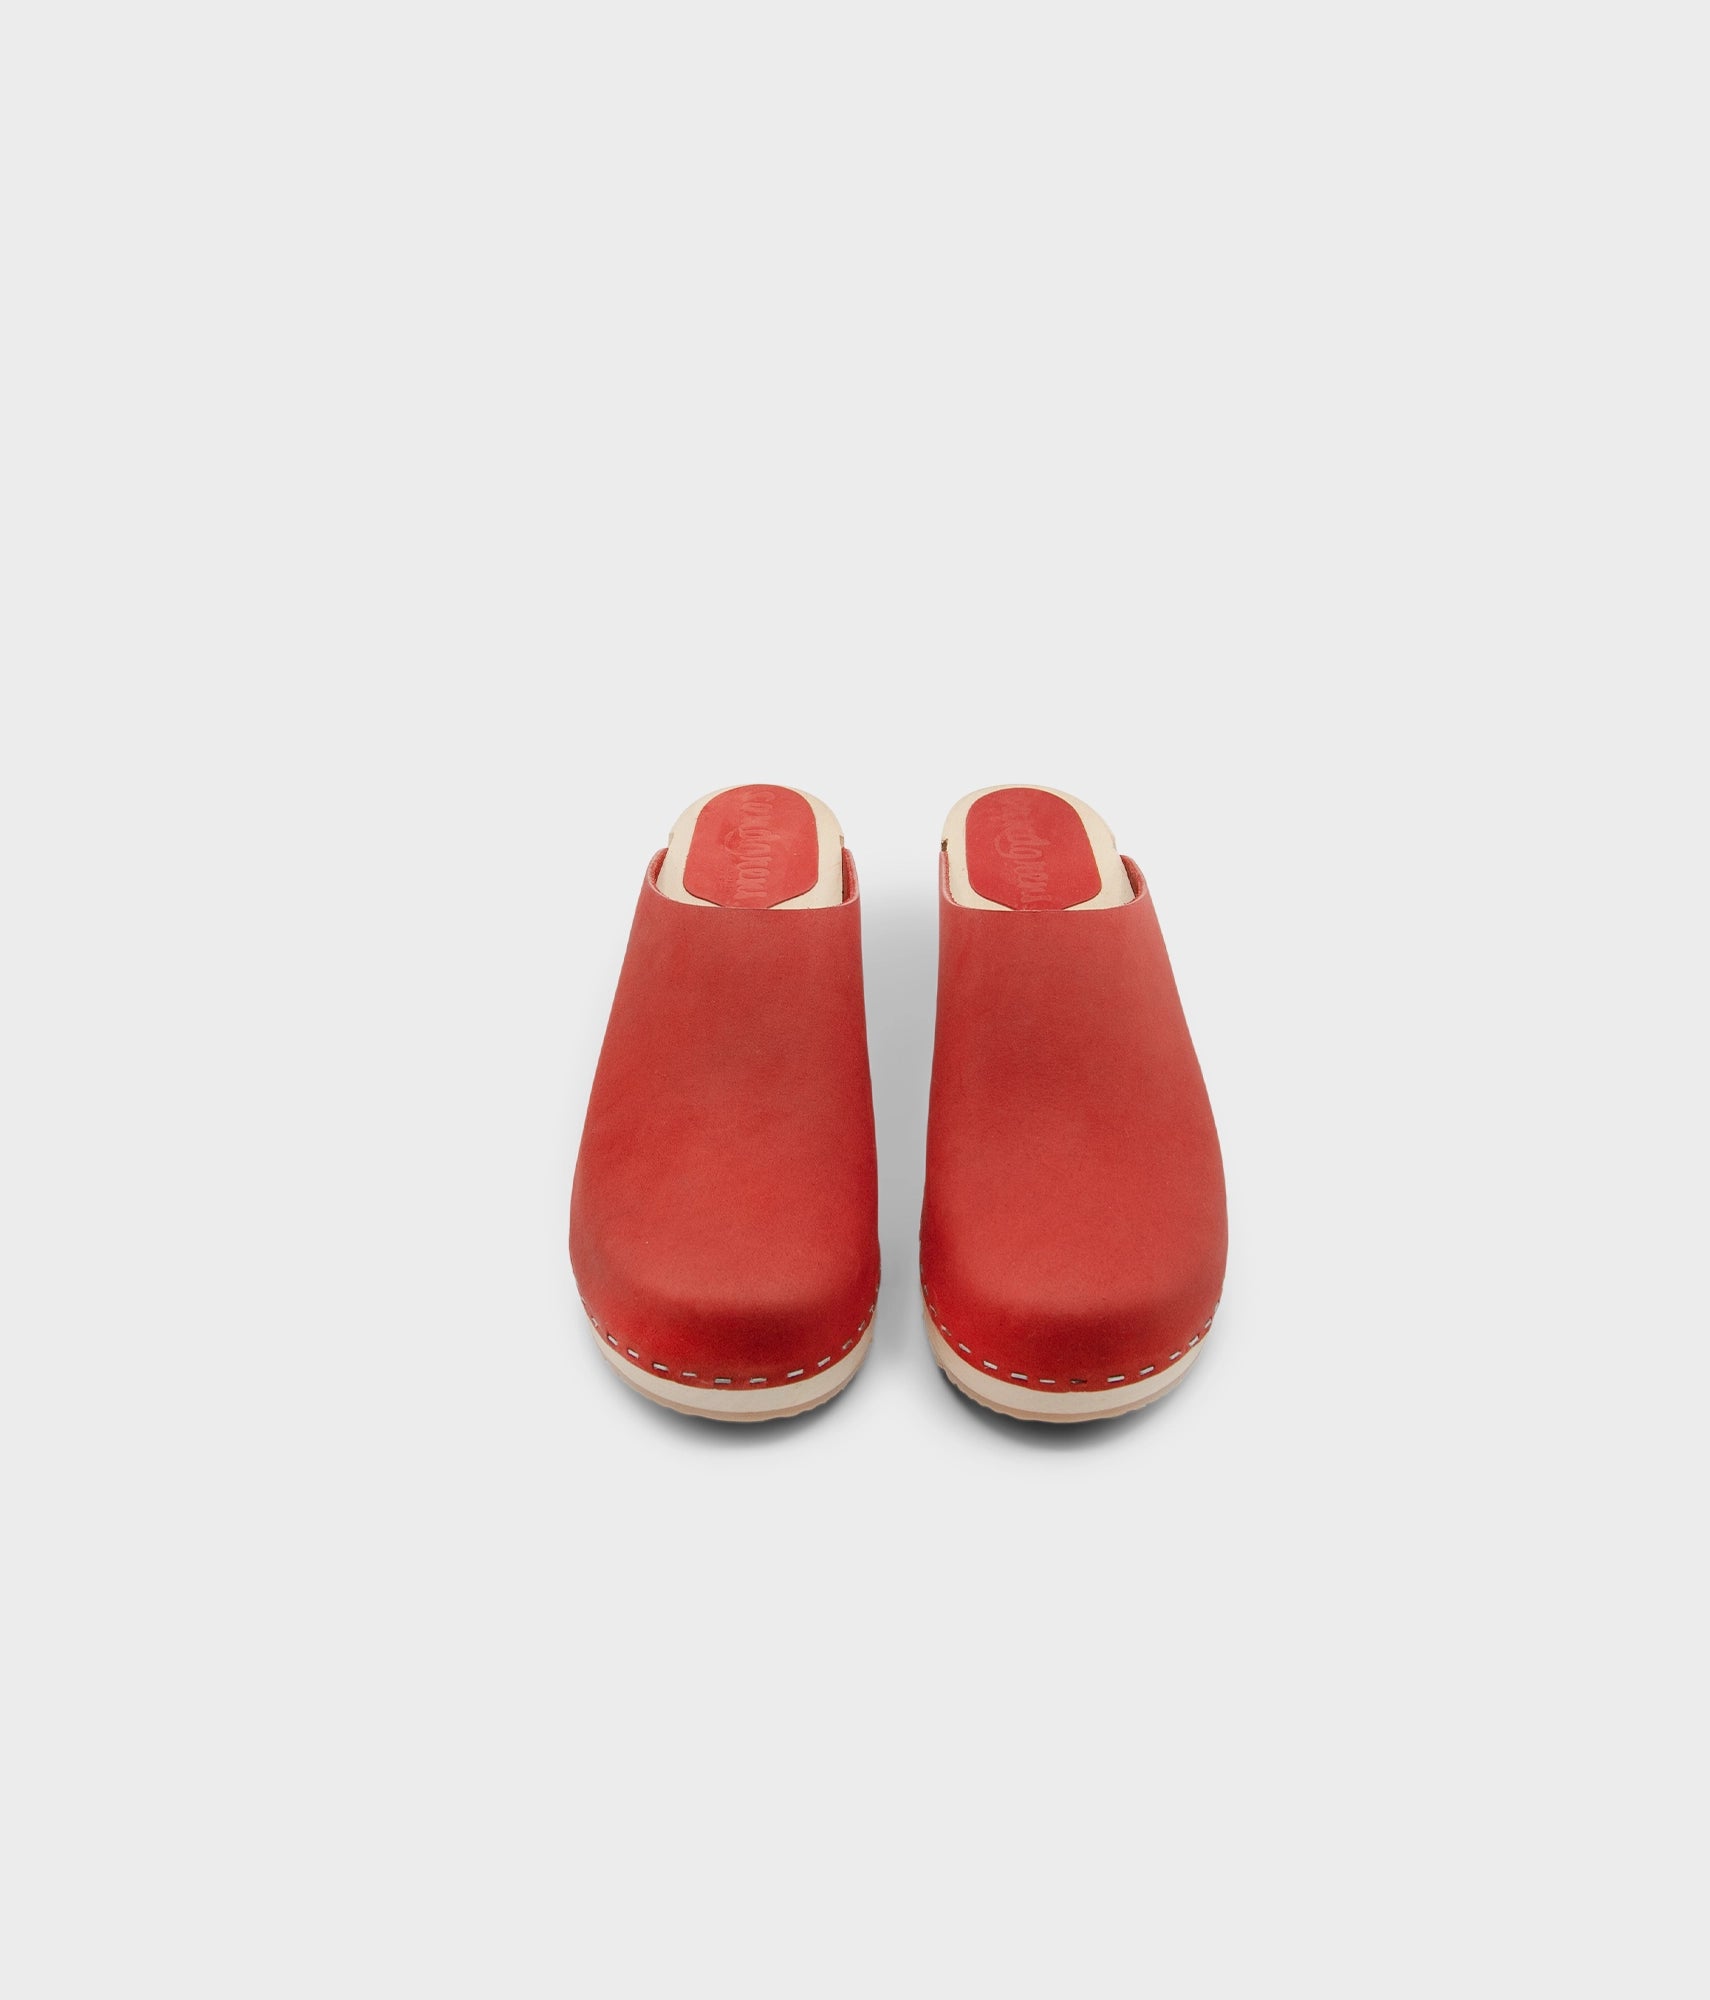 low heeled minimalistic clog mules in red nubuck leather stapled on a light wooden base